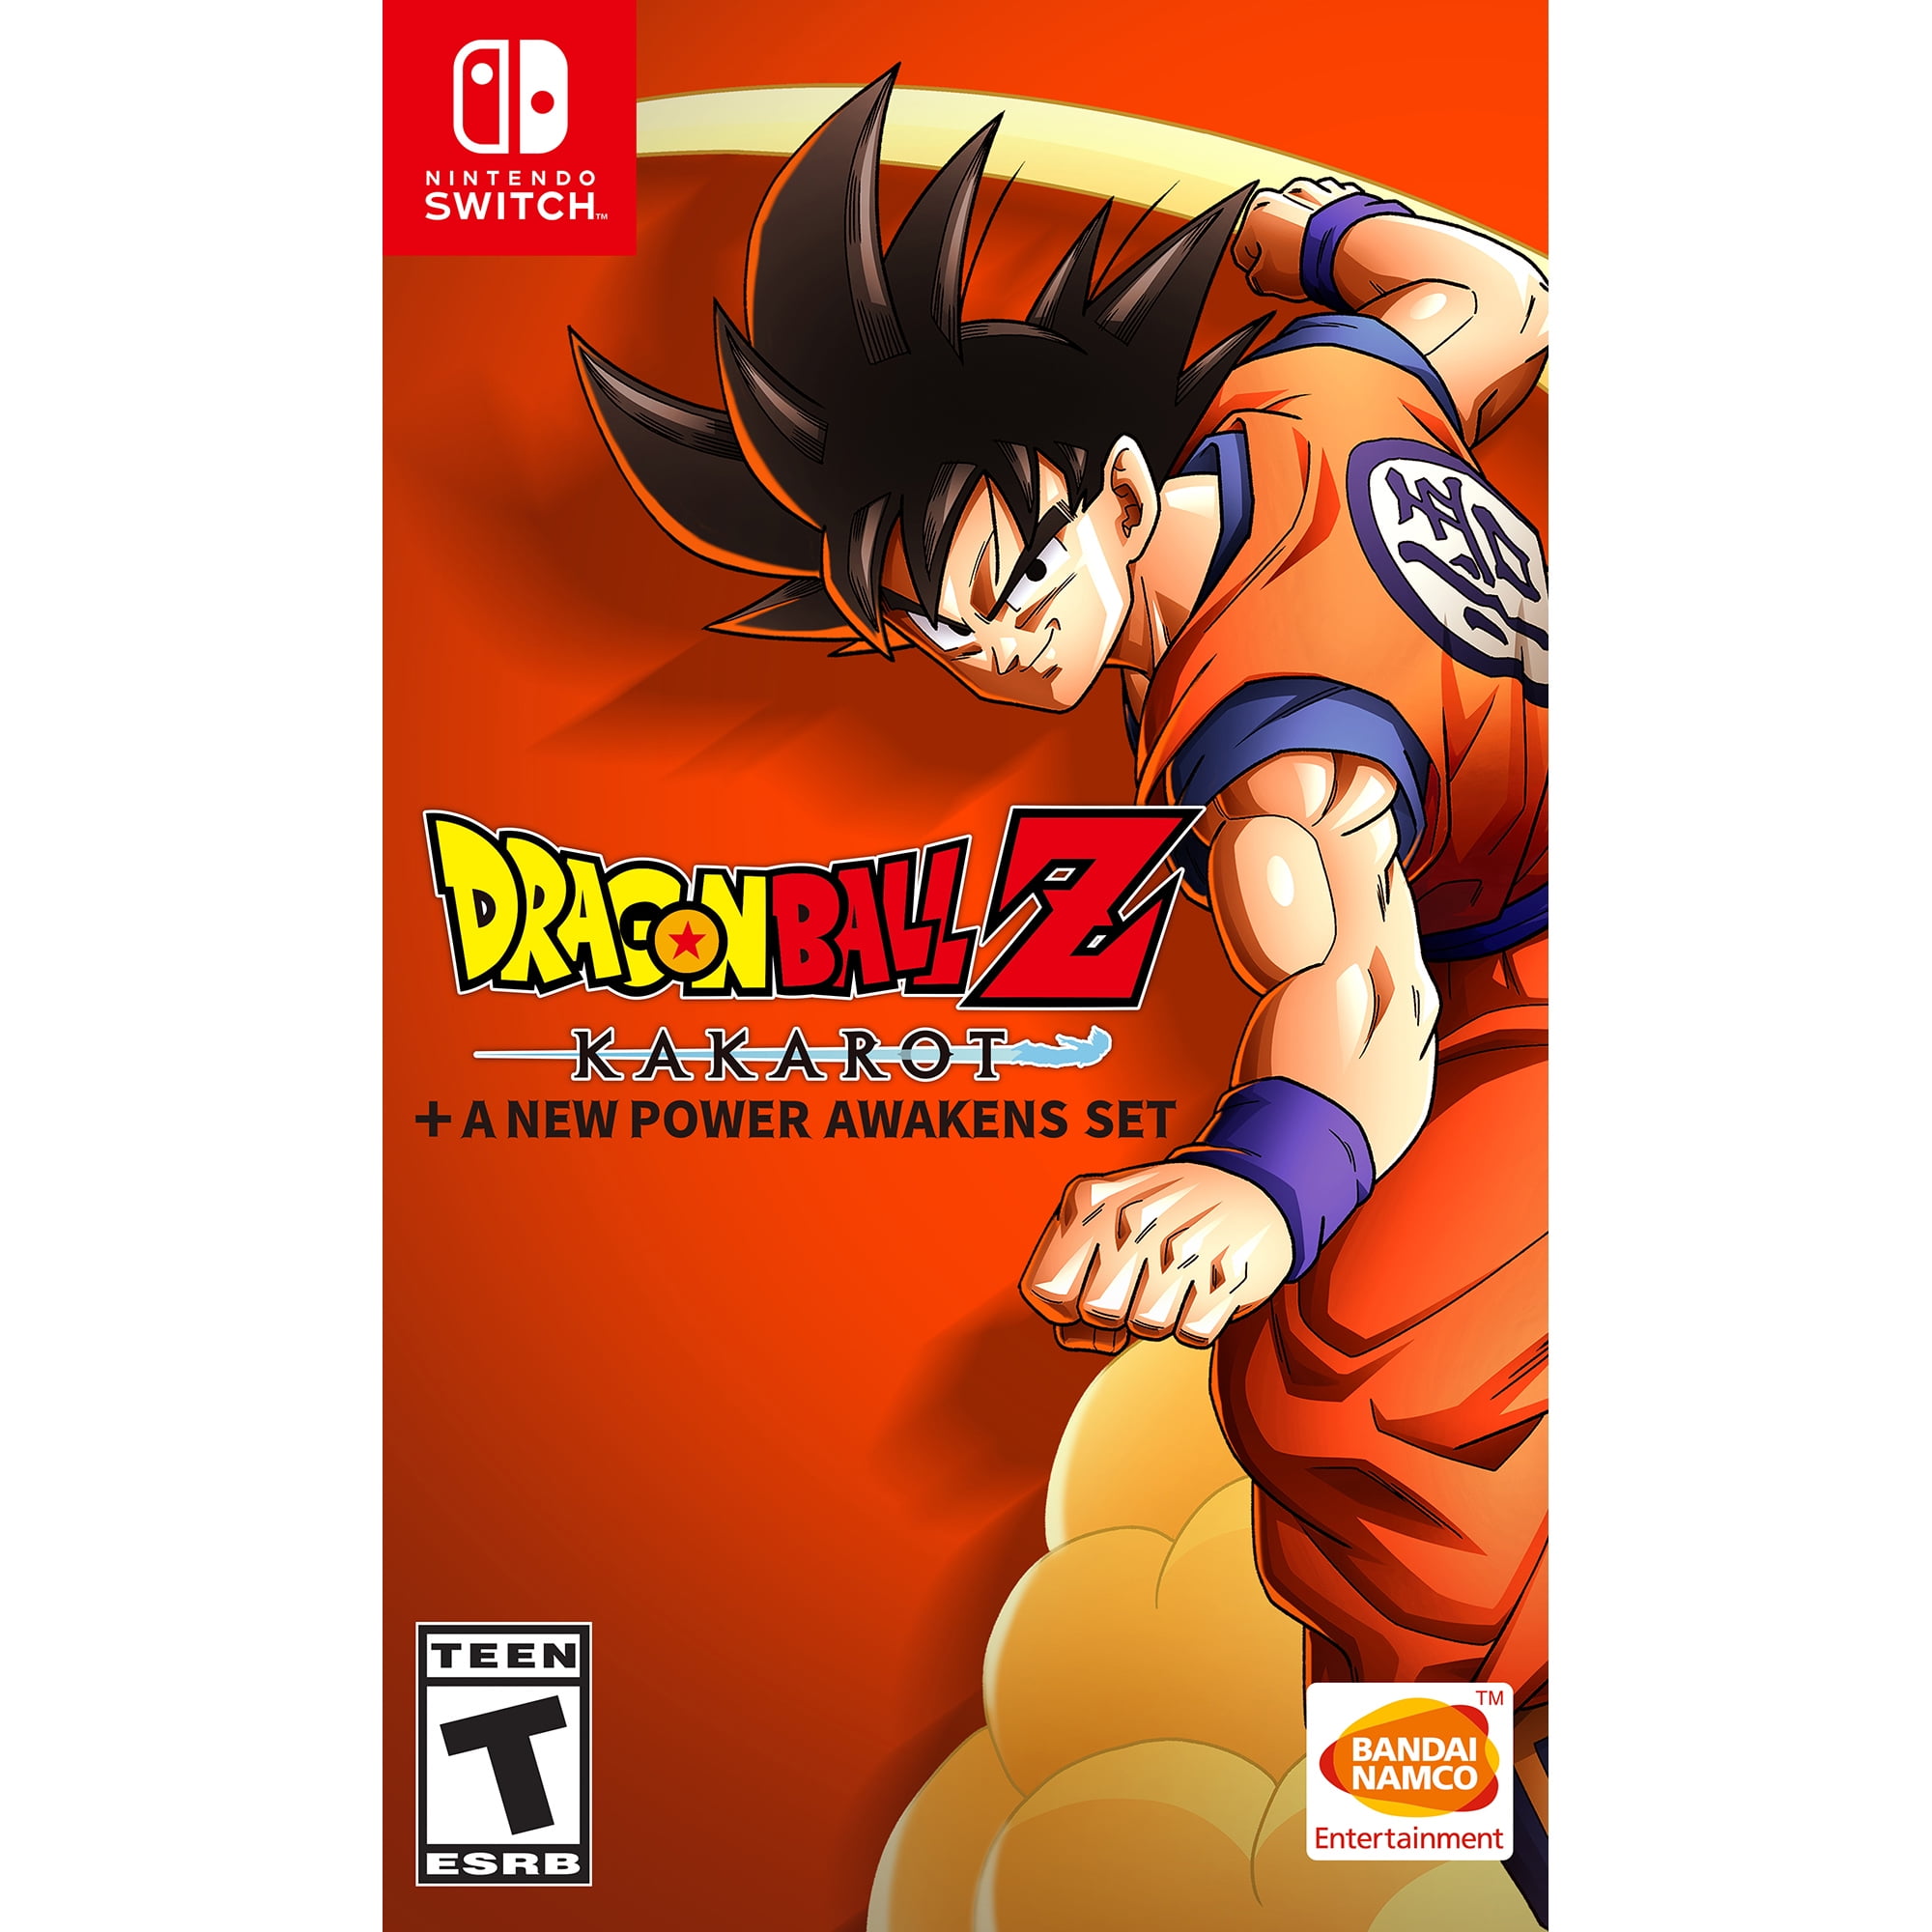 The best Dragon Ball games on Switch and mobile